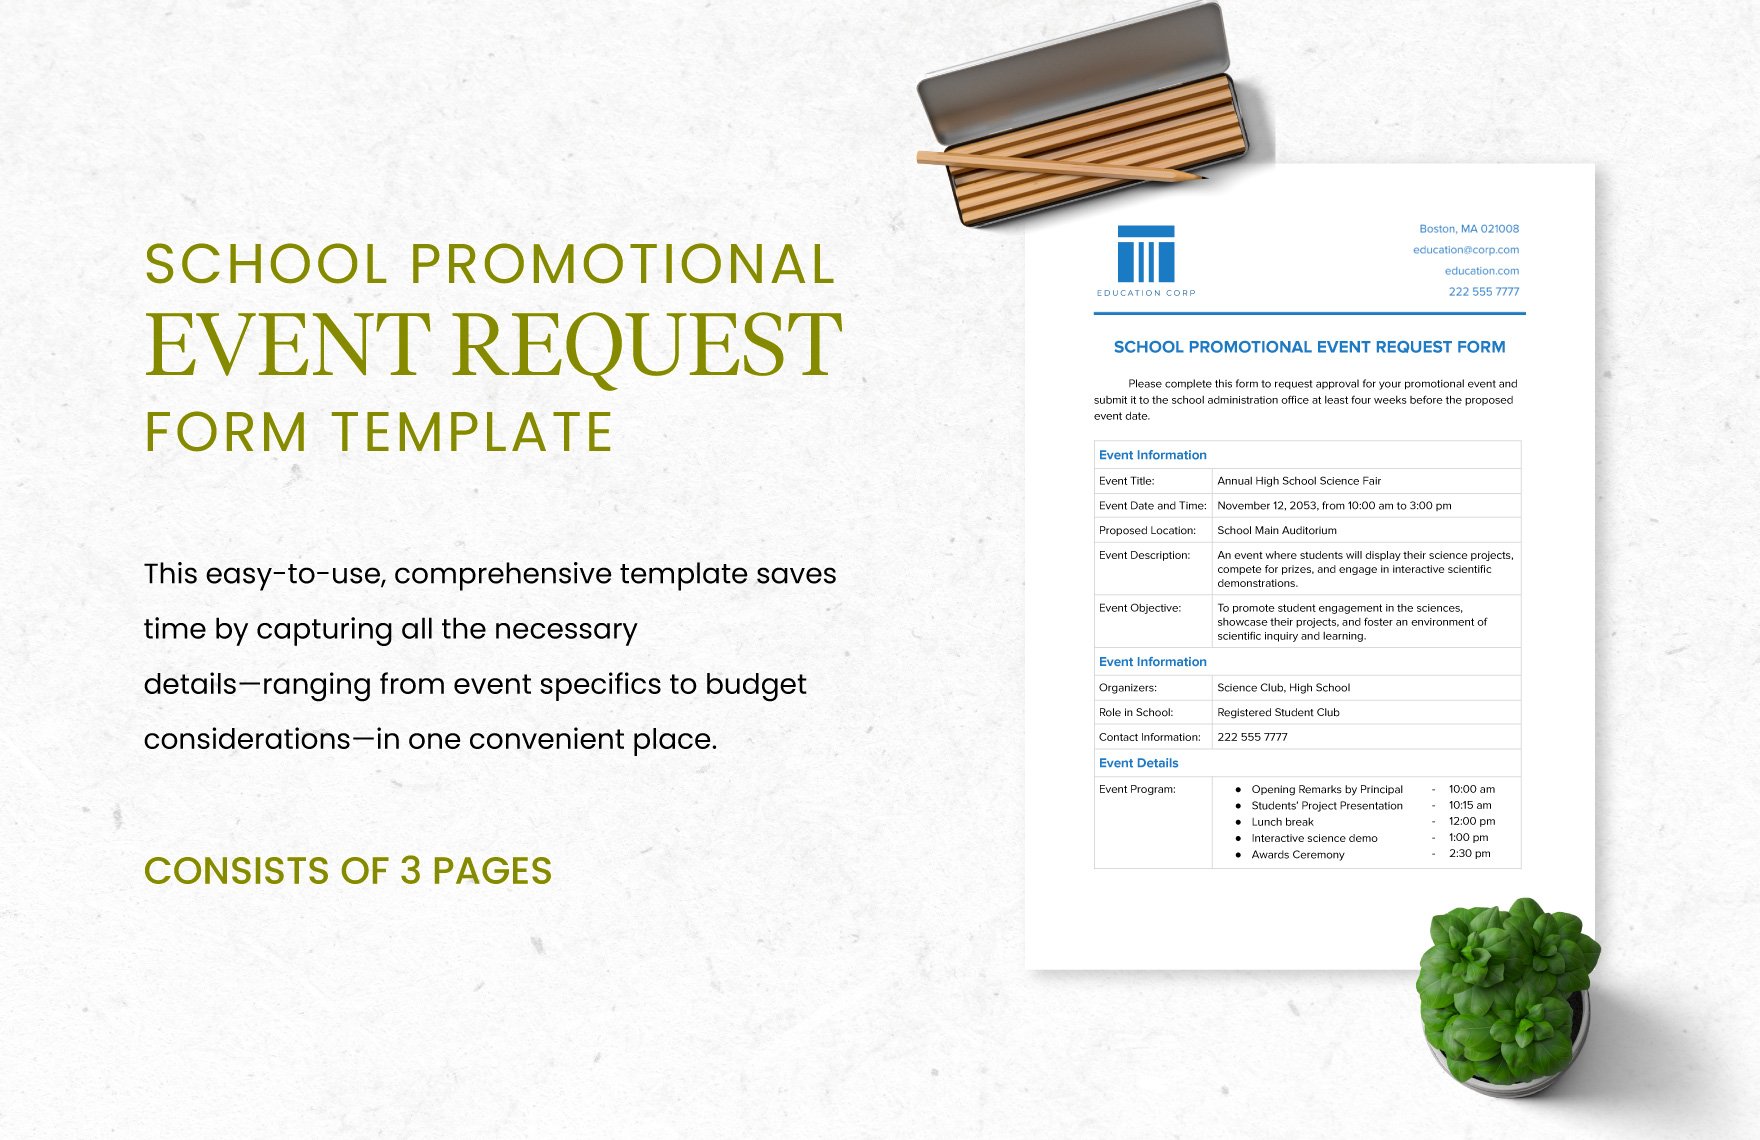 School Promotional Event Request Form Template